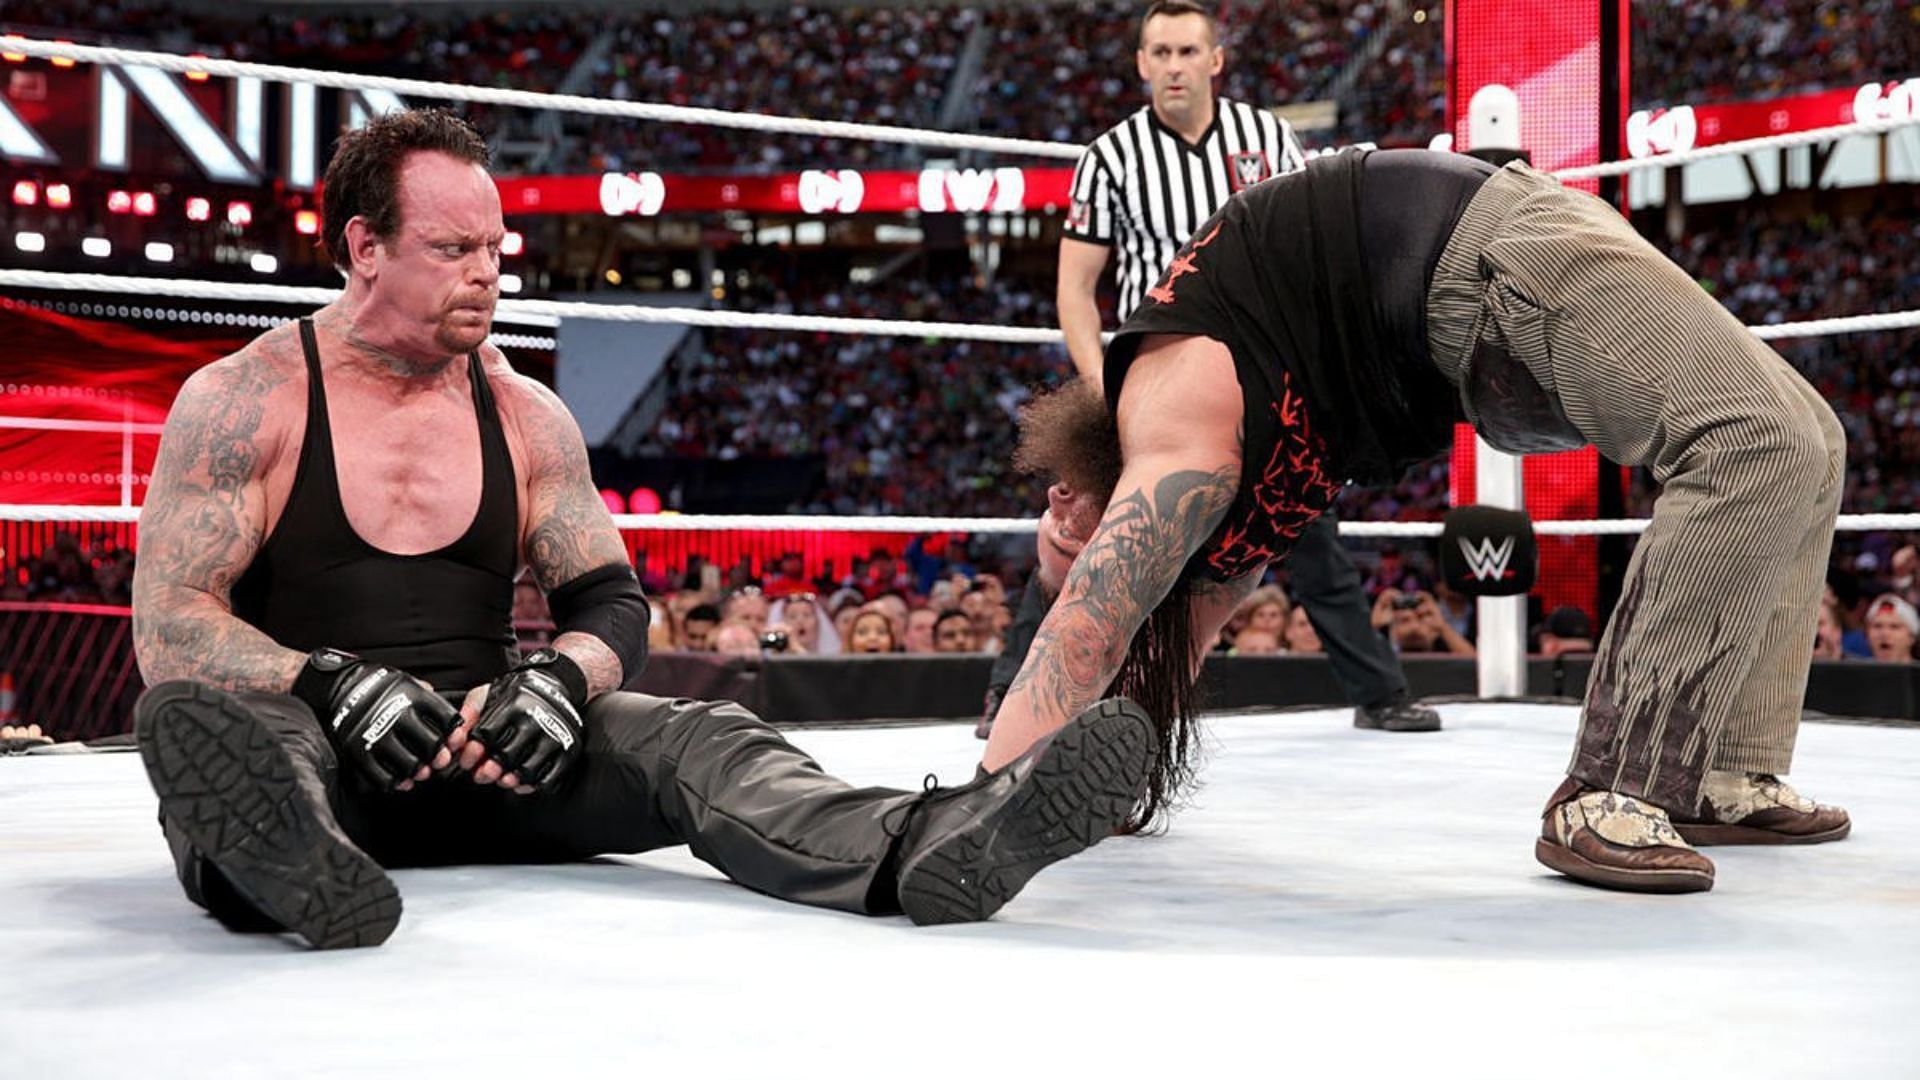 Bray Wyatt and The Undertaker were embroiled in a feud in 2015